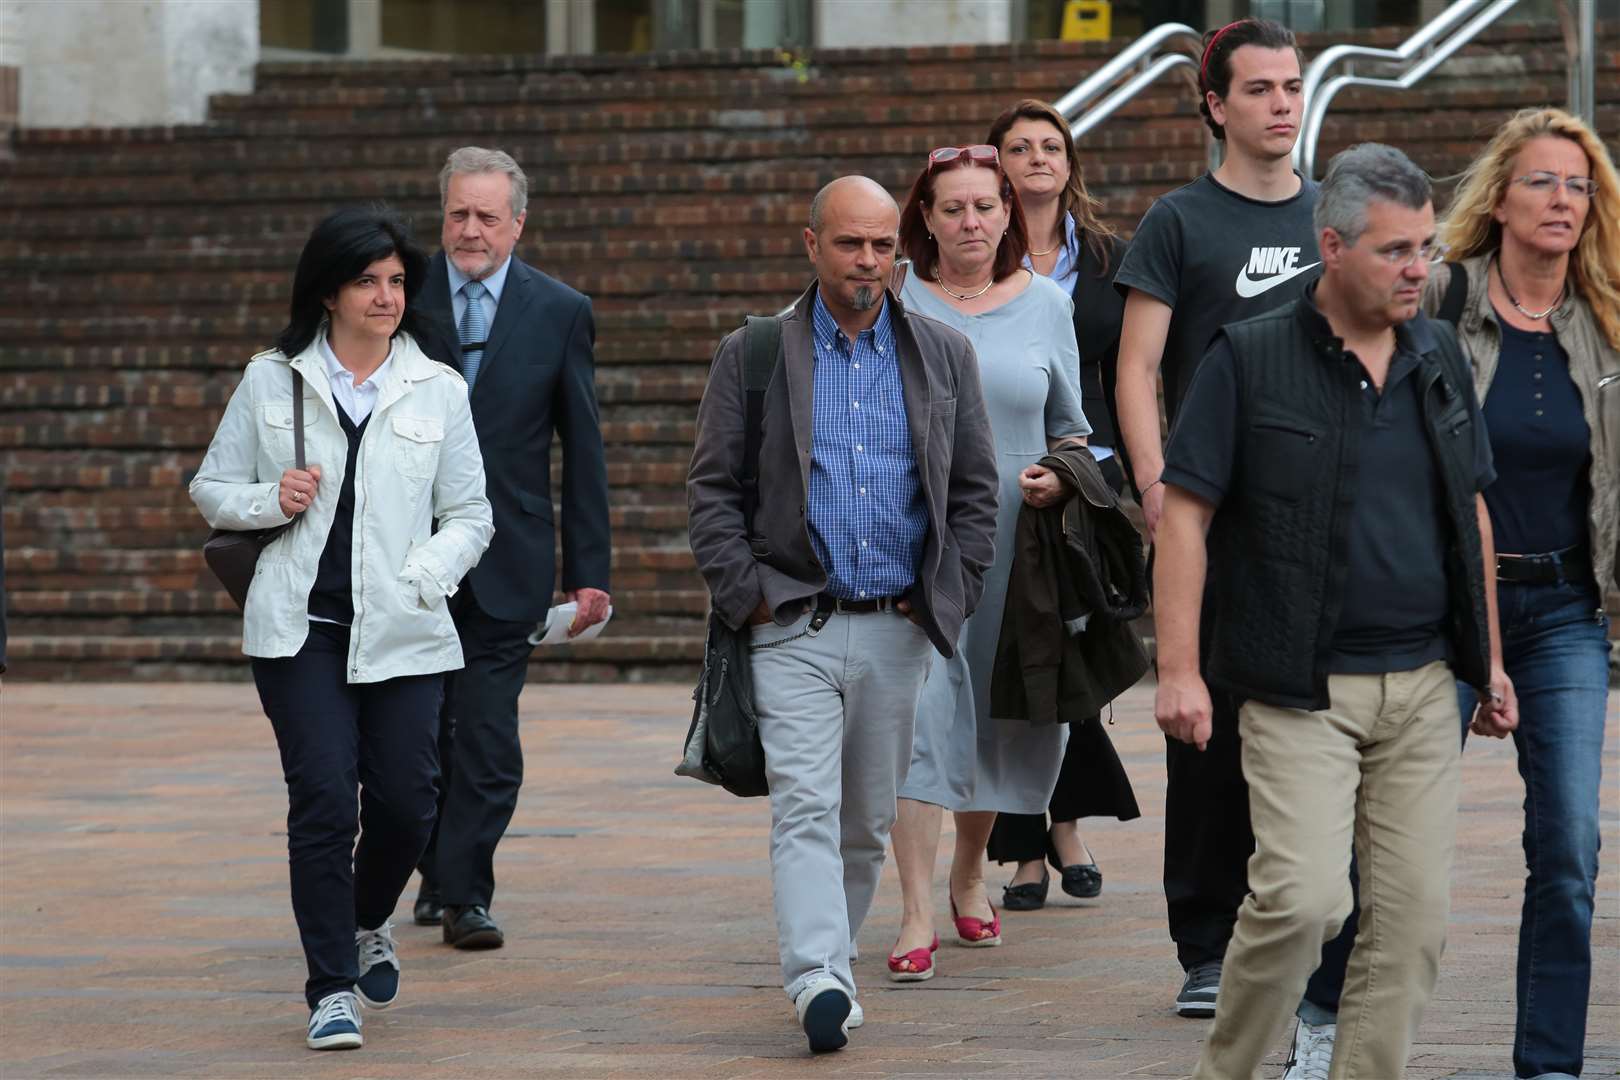 The Leotta family, with Alex Galbiati (third from right) leave Maidstone Crown Court